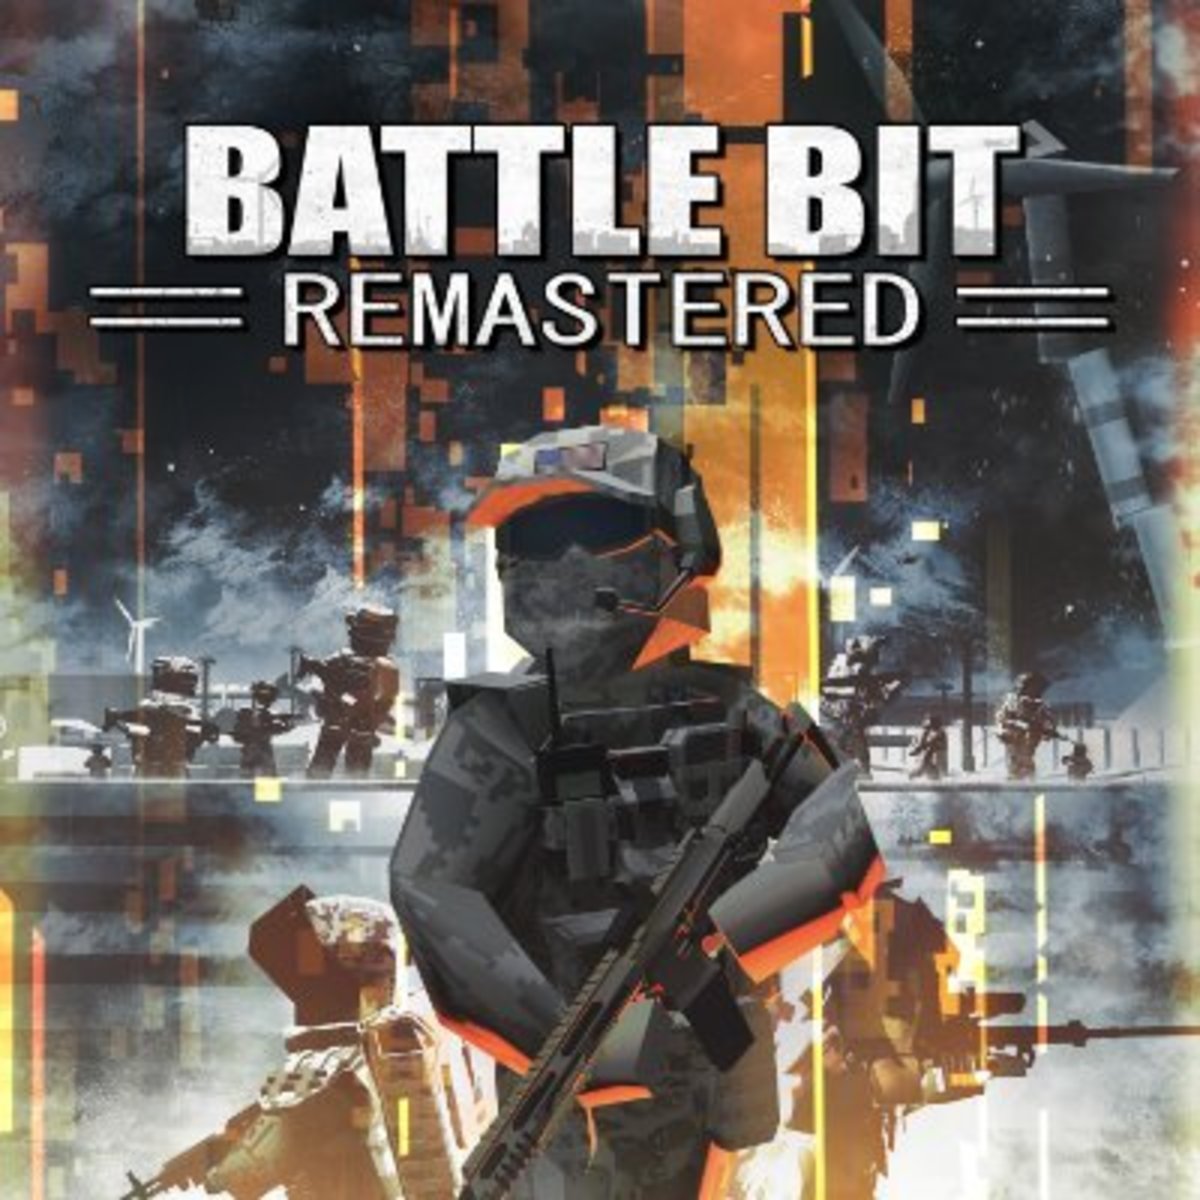 BattleBit Remastered has sold nearly 2 million copies since launch